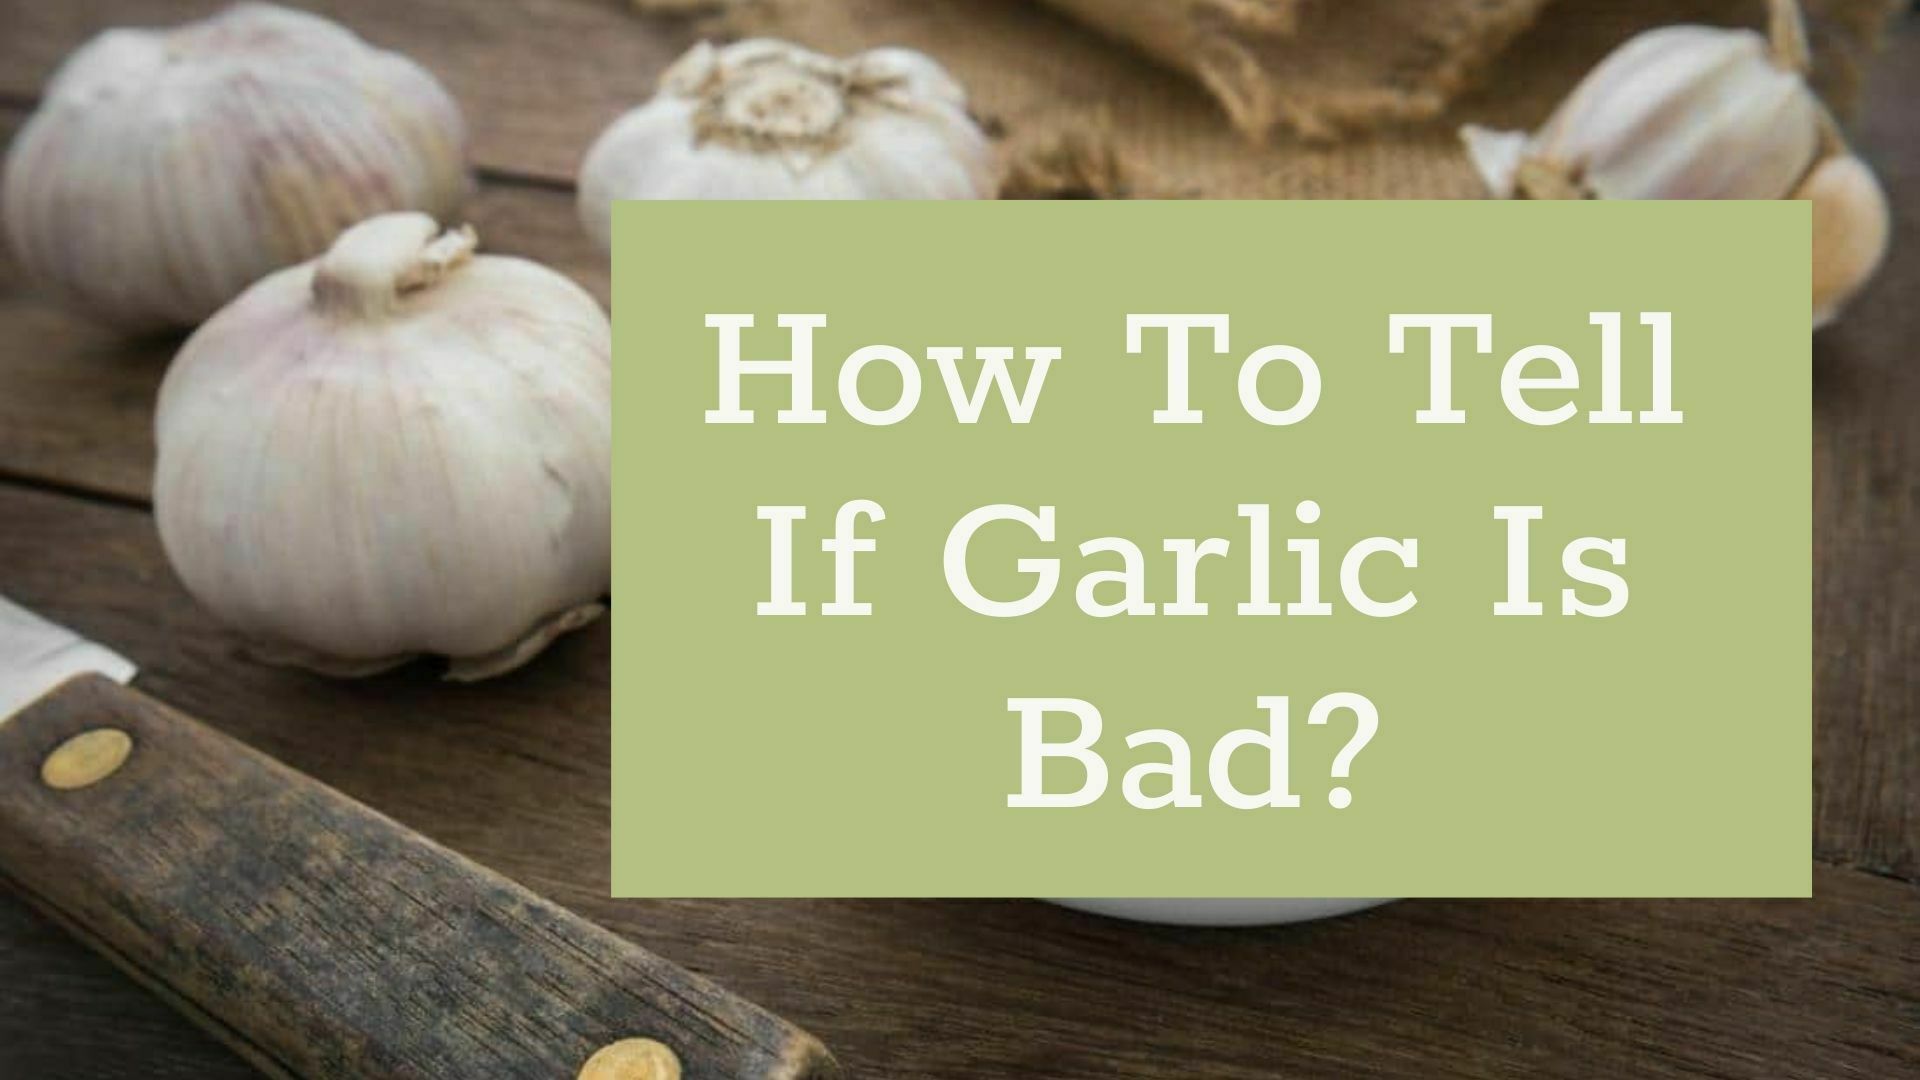 How To Tell If Garlic Is Bad? 6 Tips For Keeping Garlic Always Fresh